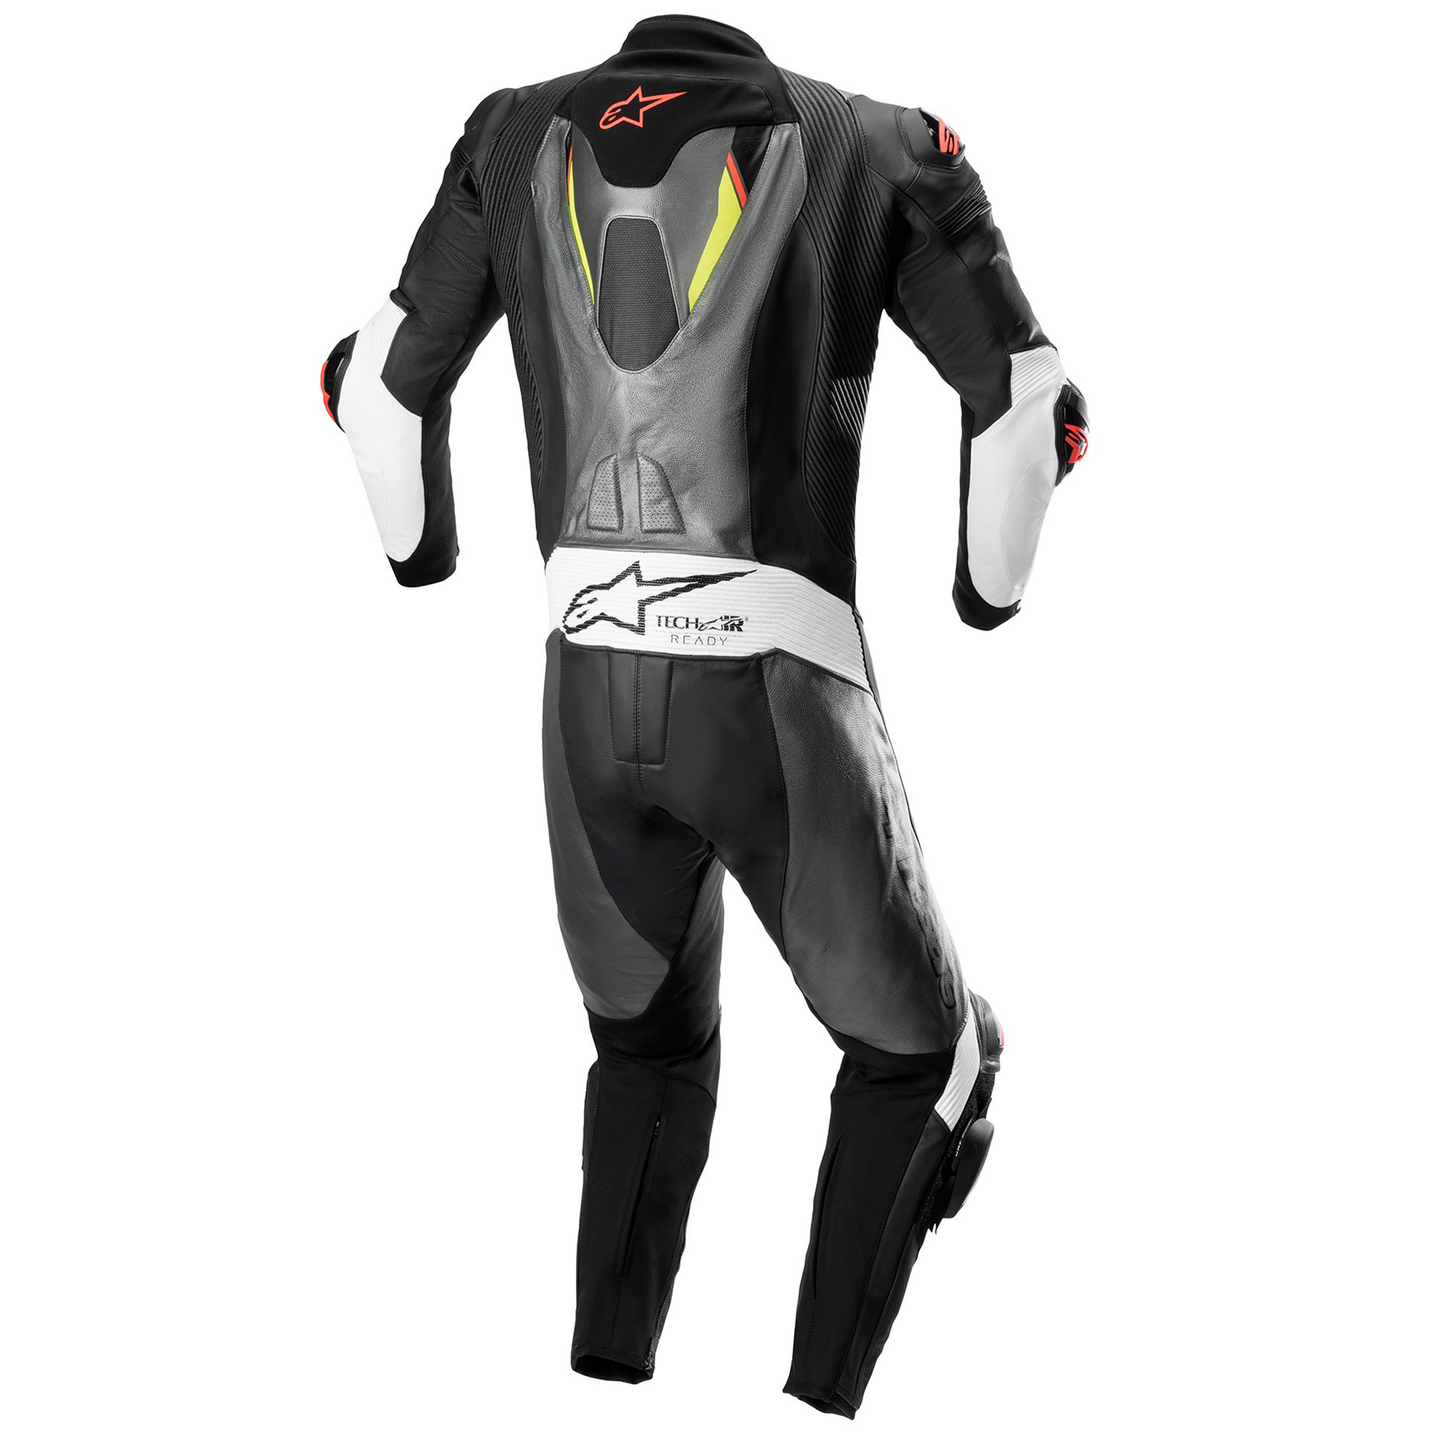 Alpinestars Missile V2 Ignition 1 Piece Leather Suit Met Gry/Blk/Yel/Red Flo